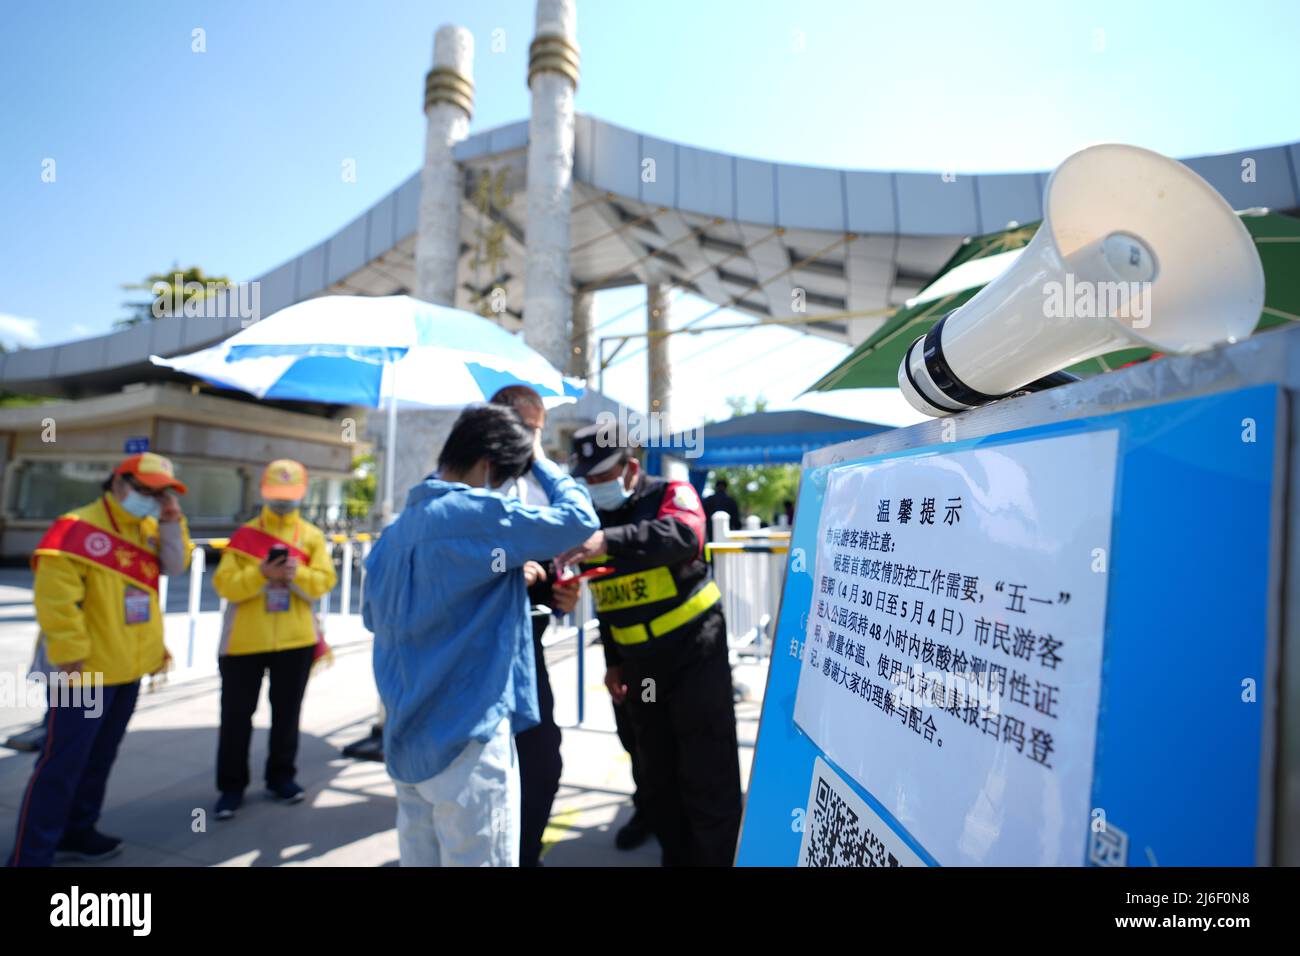 (220501) -- BEIJING, May 1, 2022 (Xinhua) -- A notice is seen showing that a negative nucleic acid test result within 48 hours is required to enter the Longtan Park during the Labor Day holiday in Beijing, capital of China, April 30, 2022. (Xinhua/Ju Huanzong) Stock Photo